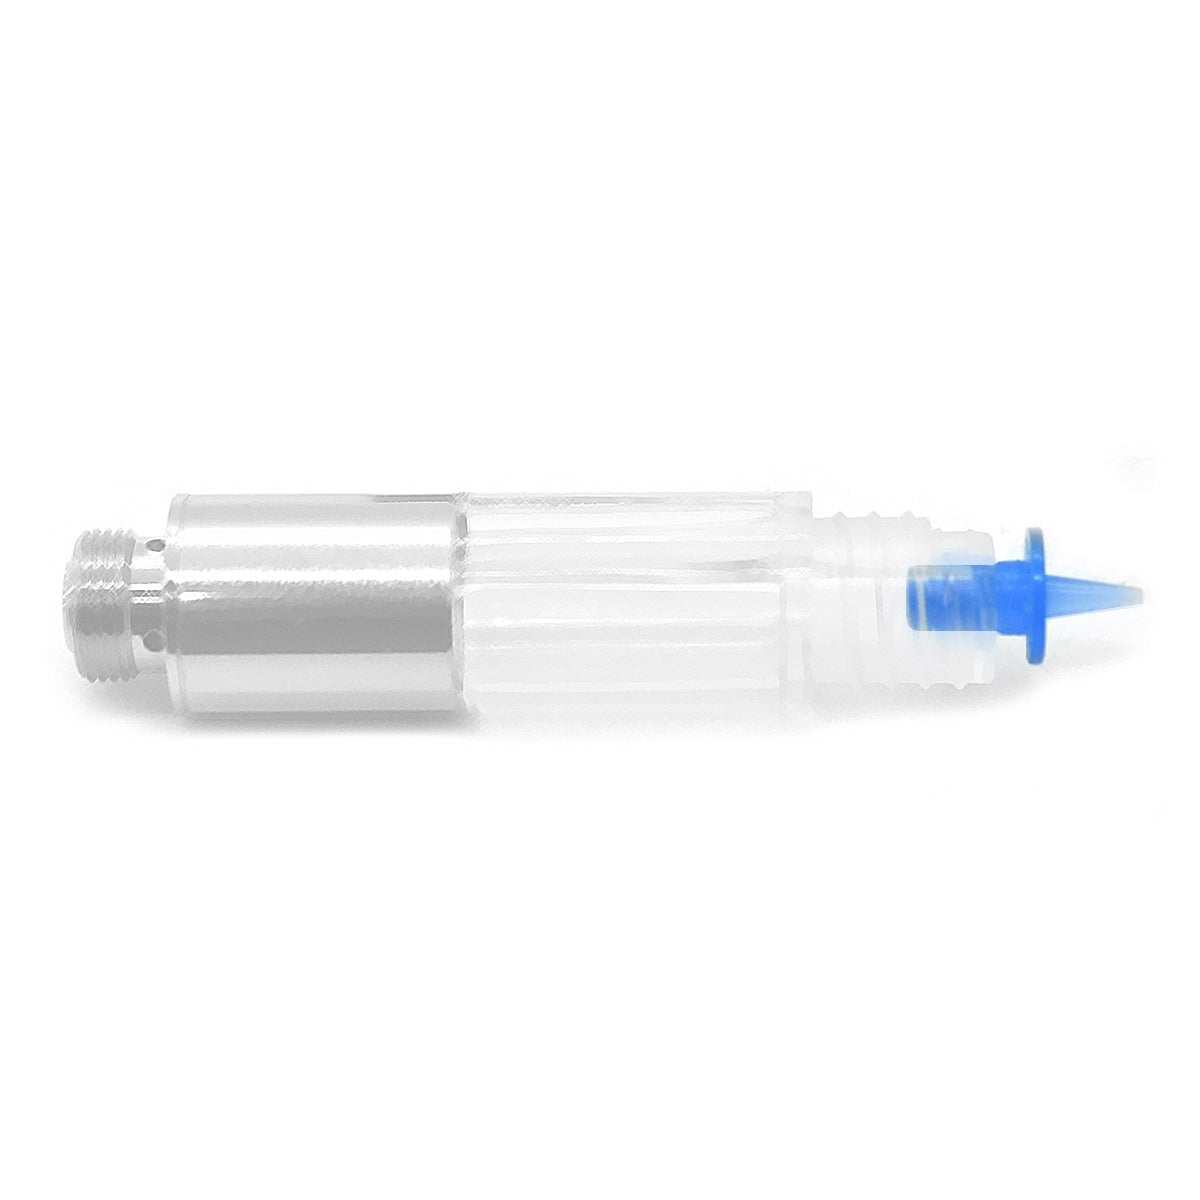 Blue Plugs - Stoppers for Beekeper Replacement Cartridge - 5pk